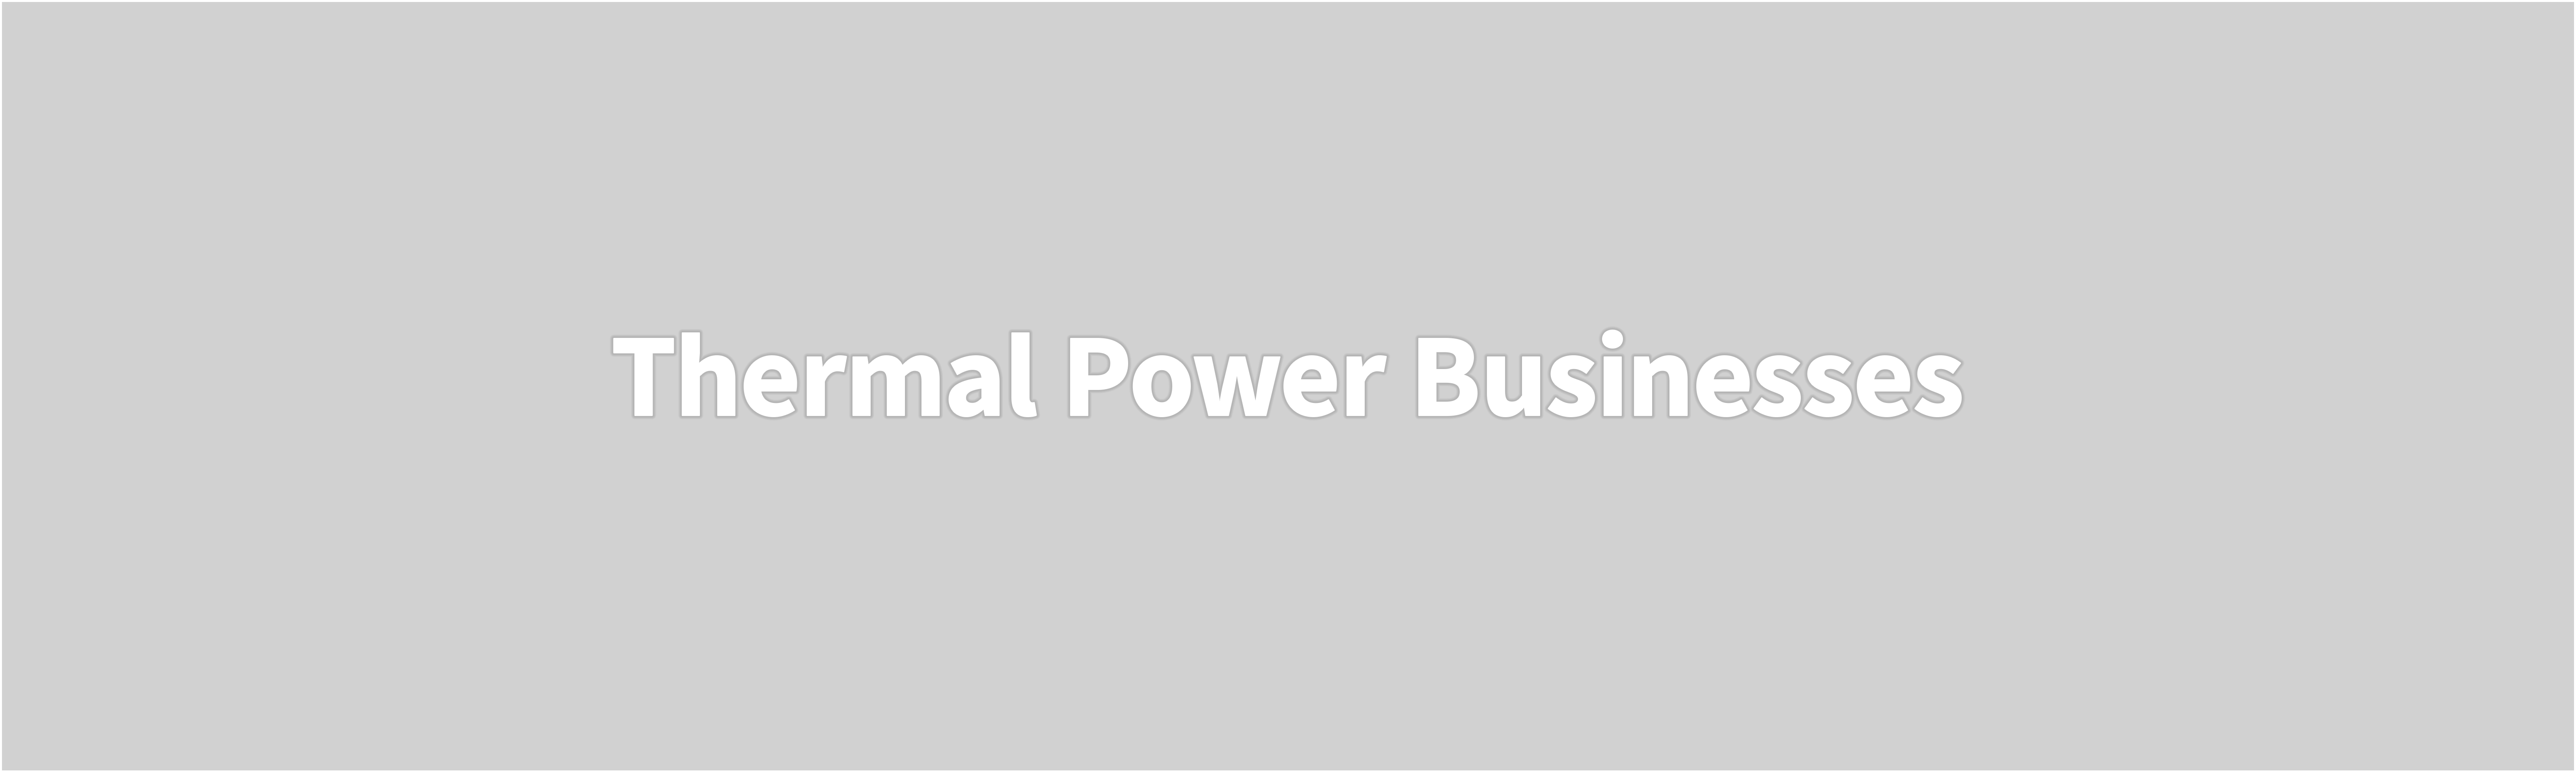 Thermal Power Businesses